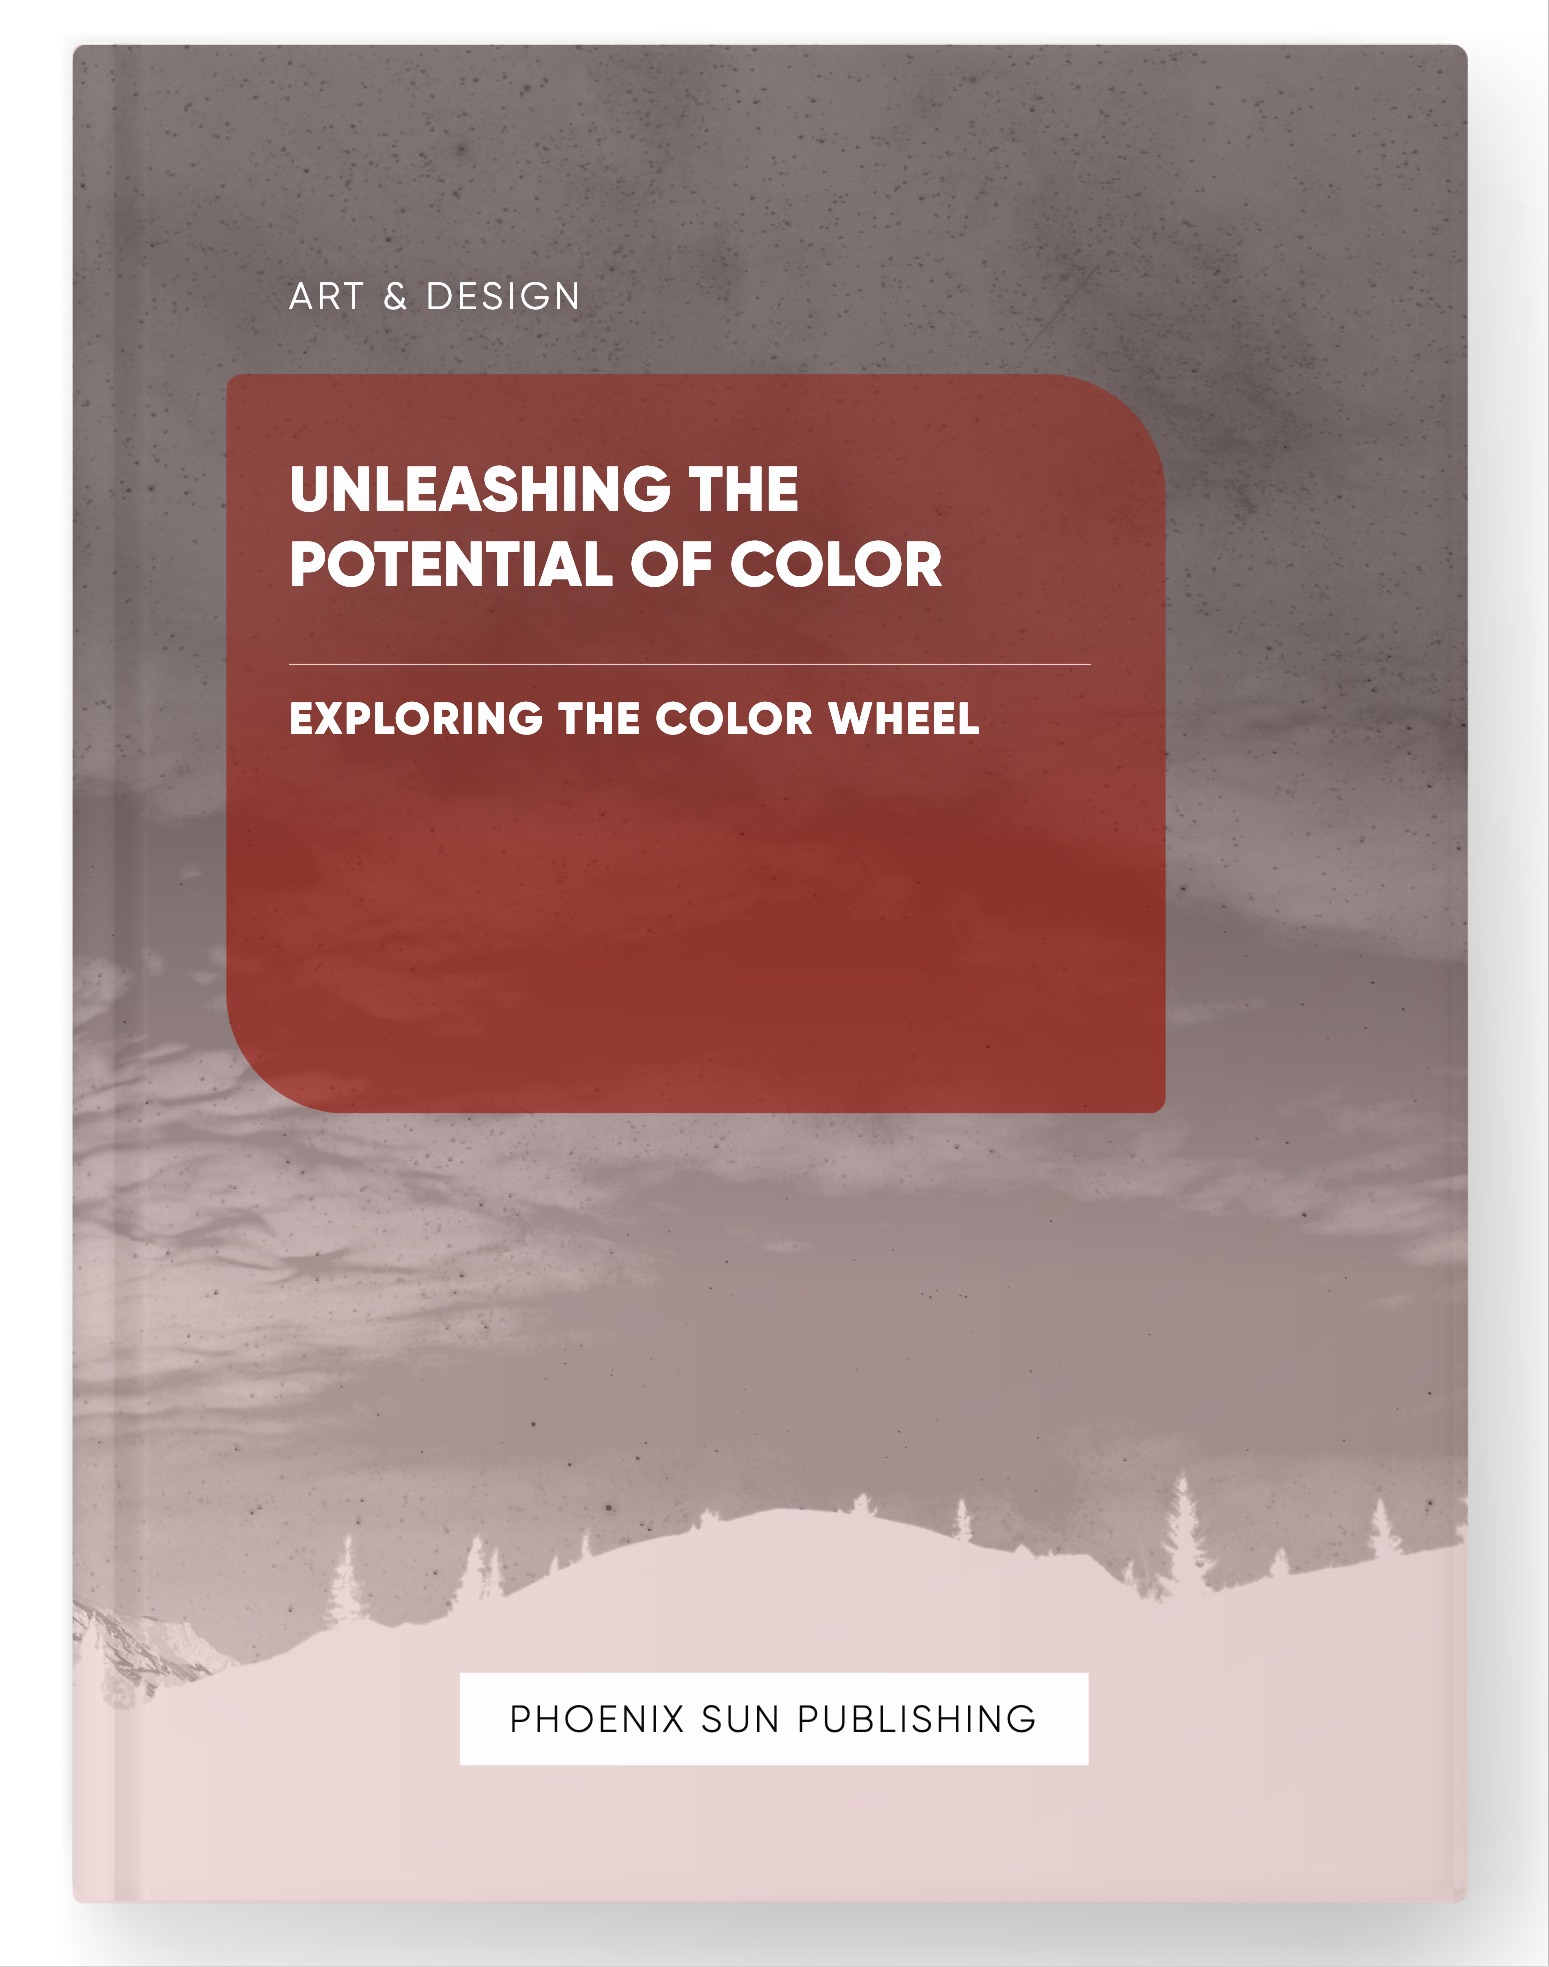 Unleashing the Potential of Color – Exploring the Color Wheel